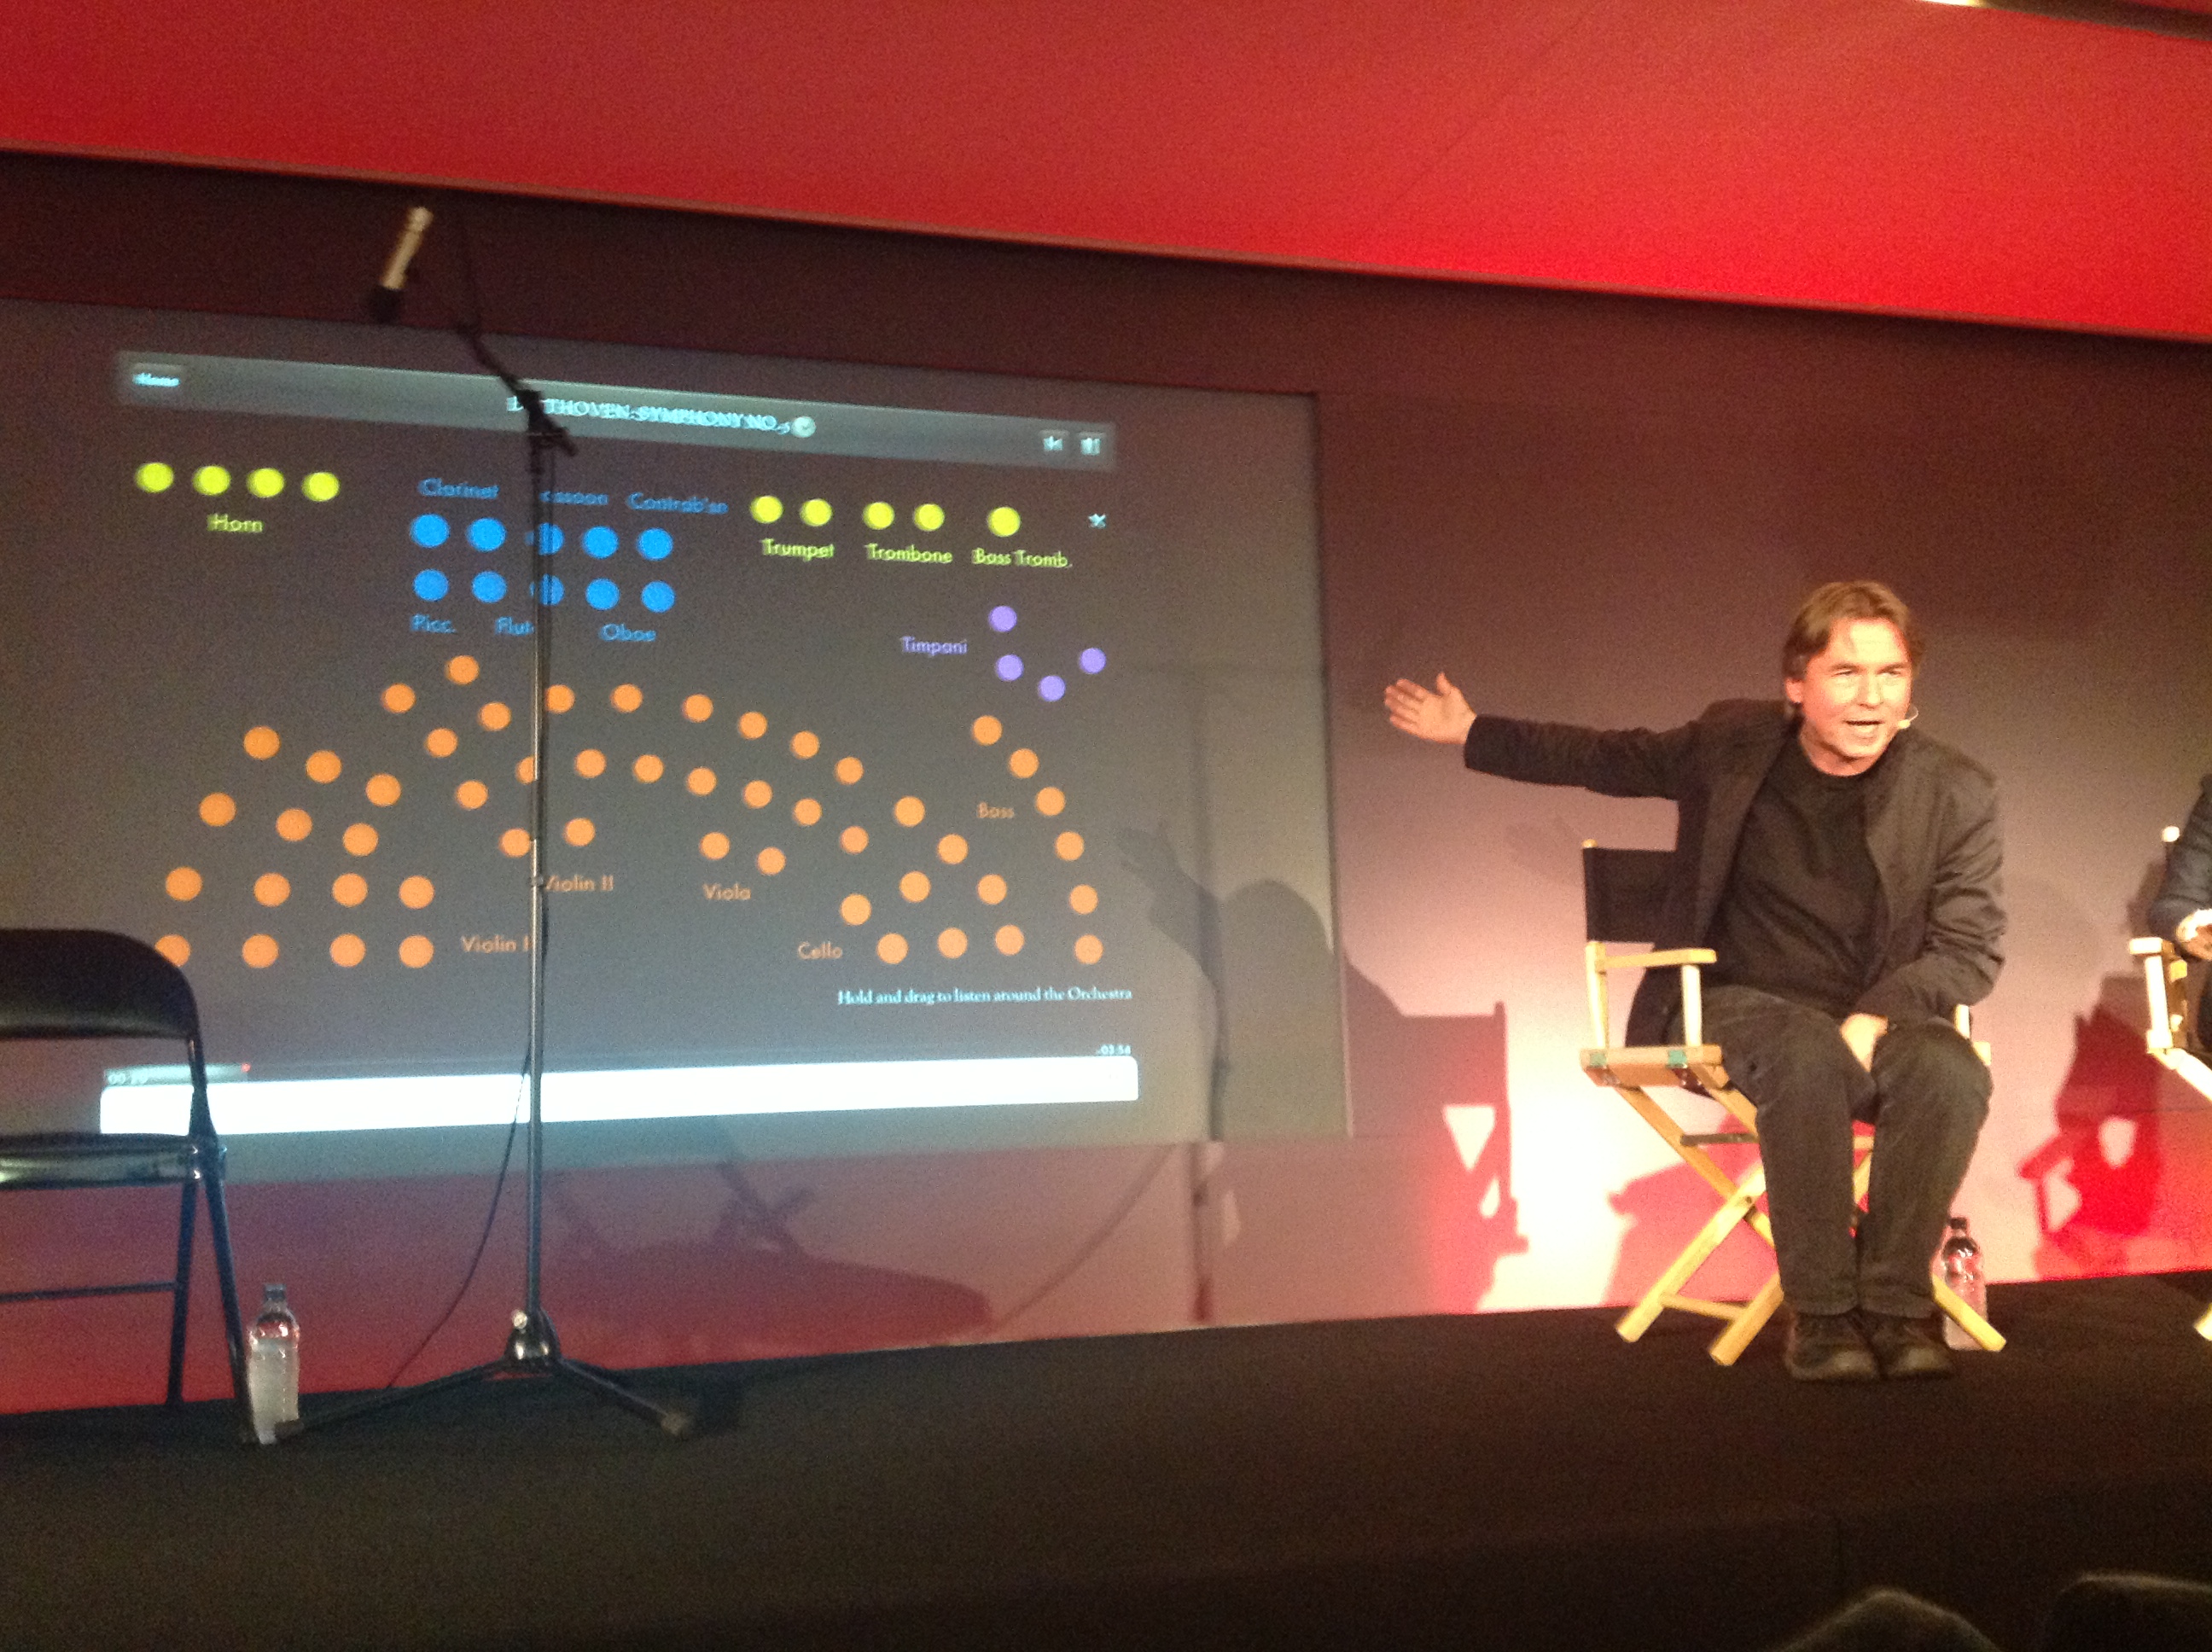 Salonen describing the orchestra diagram at the launch at the Apple store in London (14 December 2012)